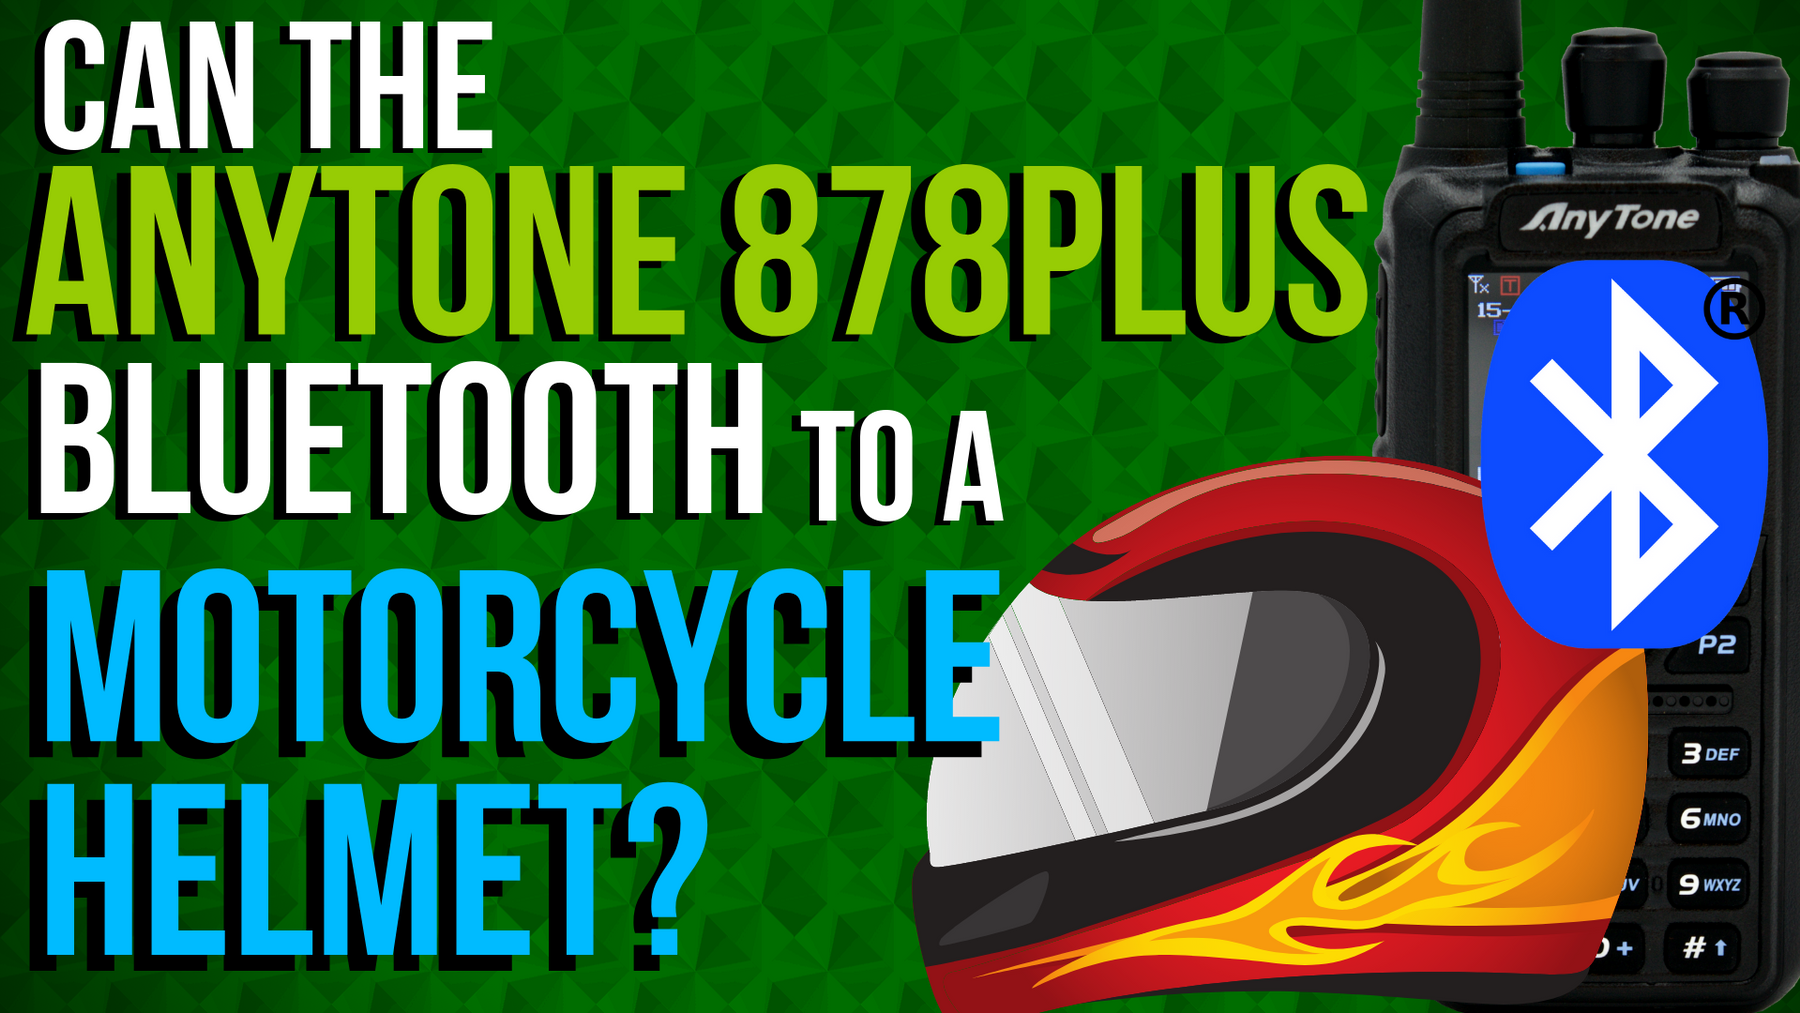 Can the AnyTone 878 PLUS Bluetooth connect to a motorcycle helmet?